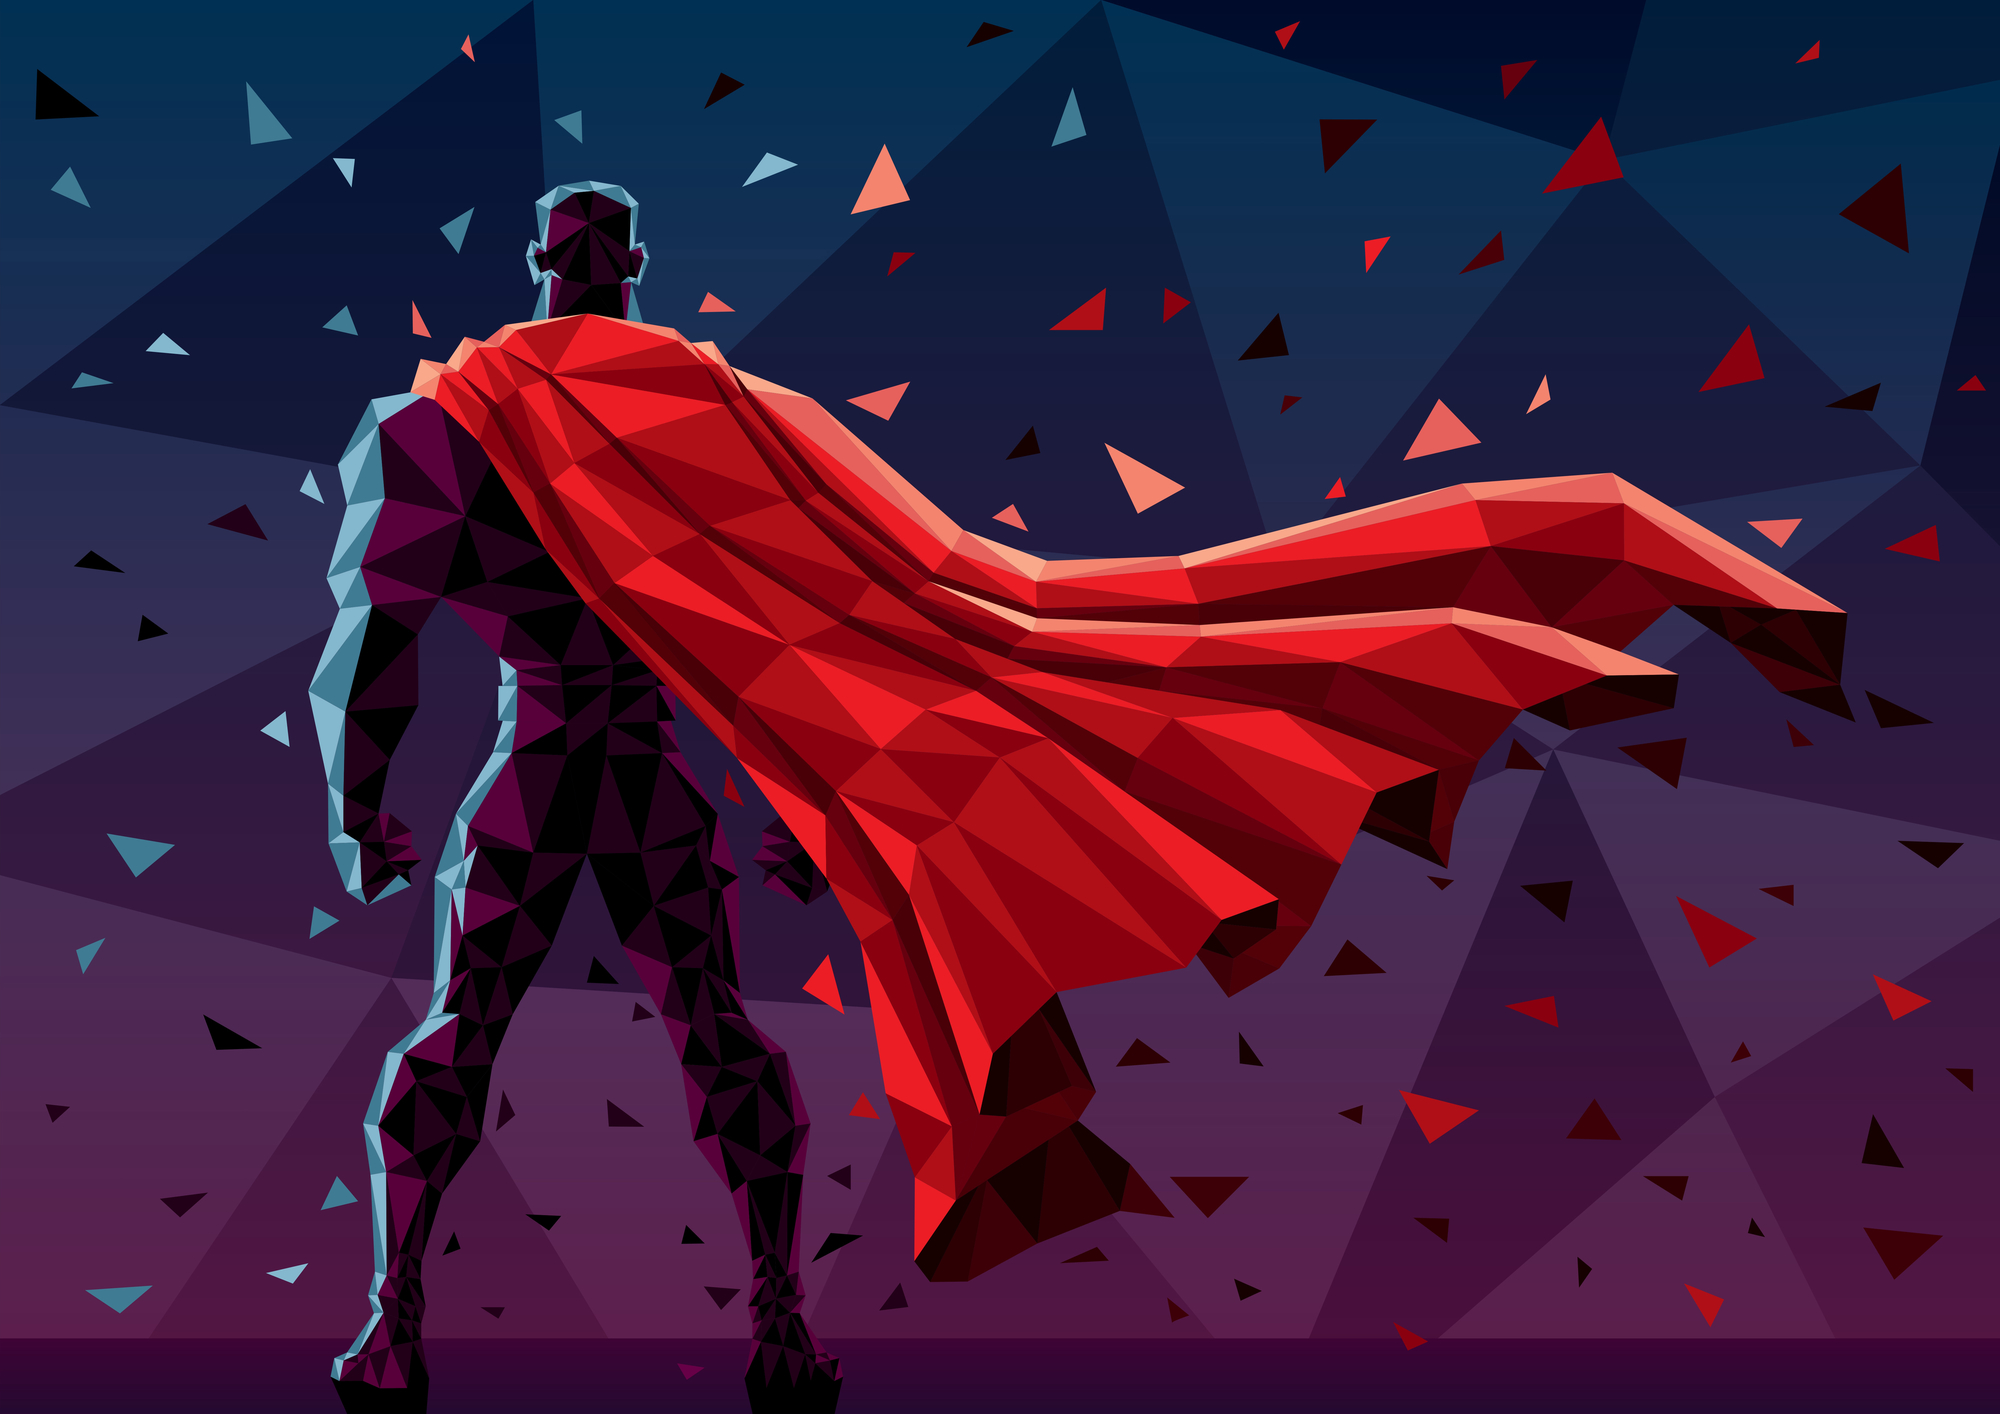 Four Lessons I Learned from the Superheroes